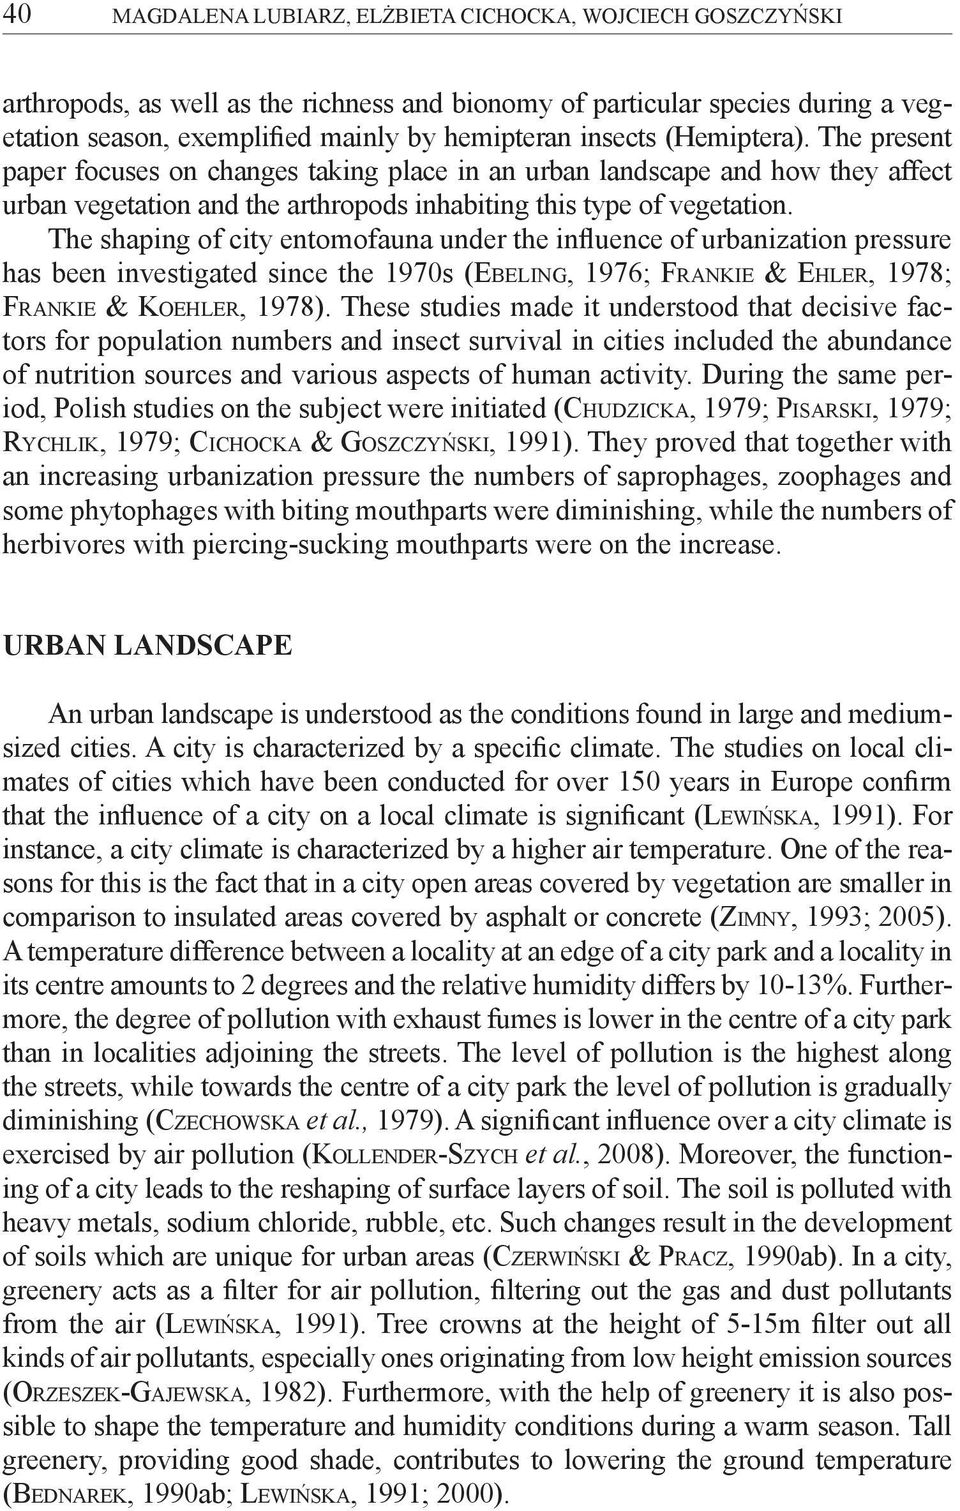 The shaping of city entomofauna under the influence of urbanization pressure has been investigated since the 1970s (Ebeling, 1976; Frankie & Ehler, 1978; Frankie & Koehler, 1978).